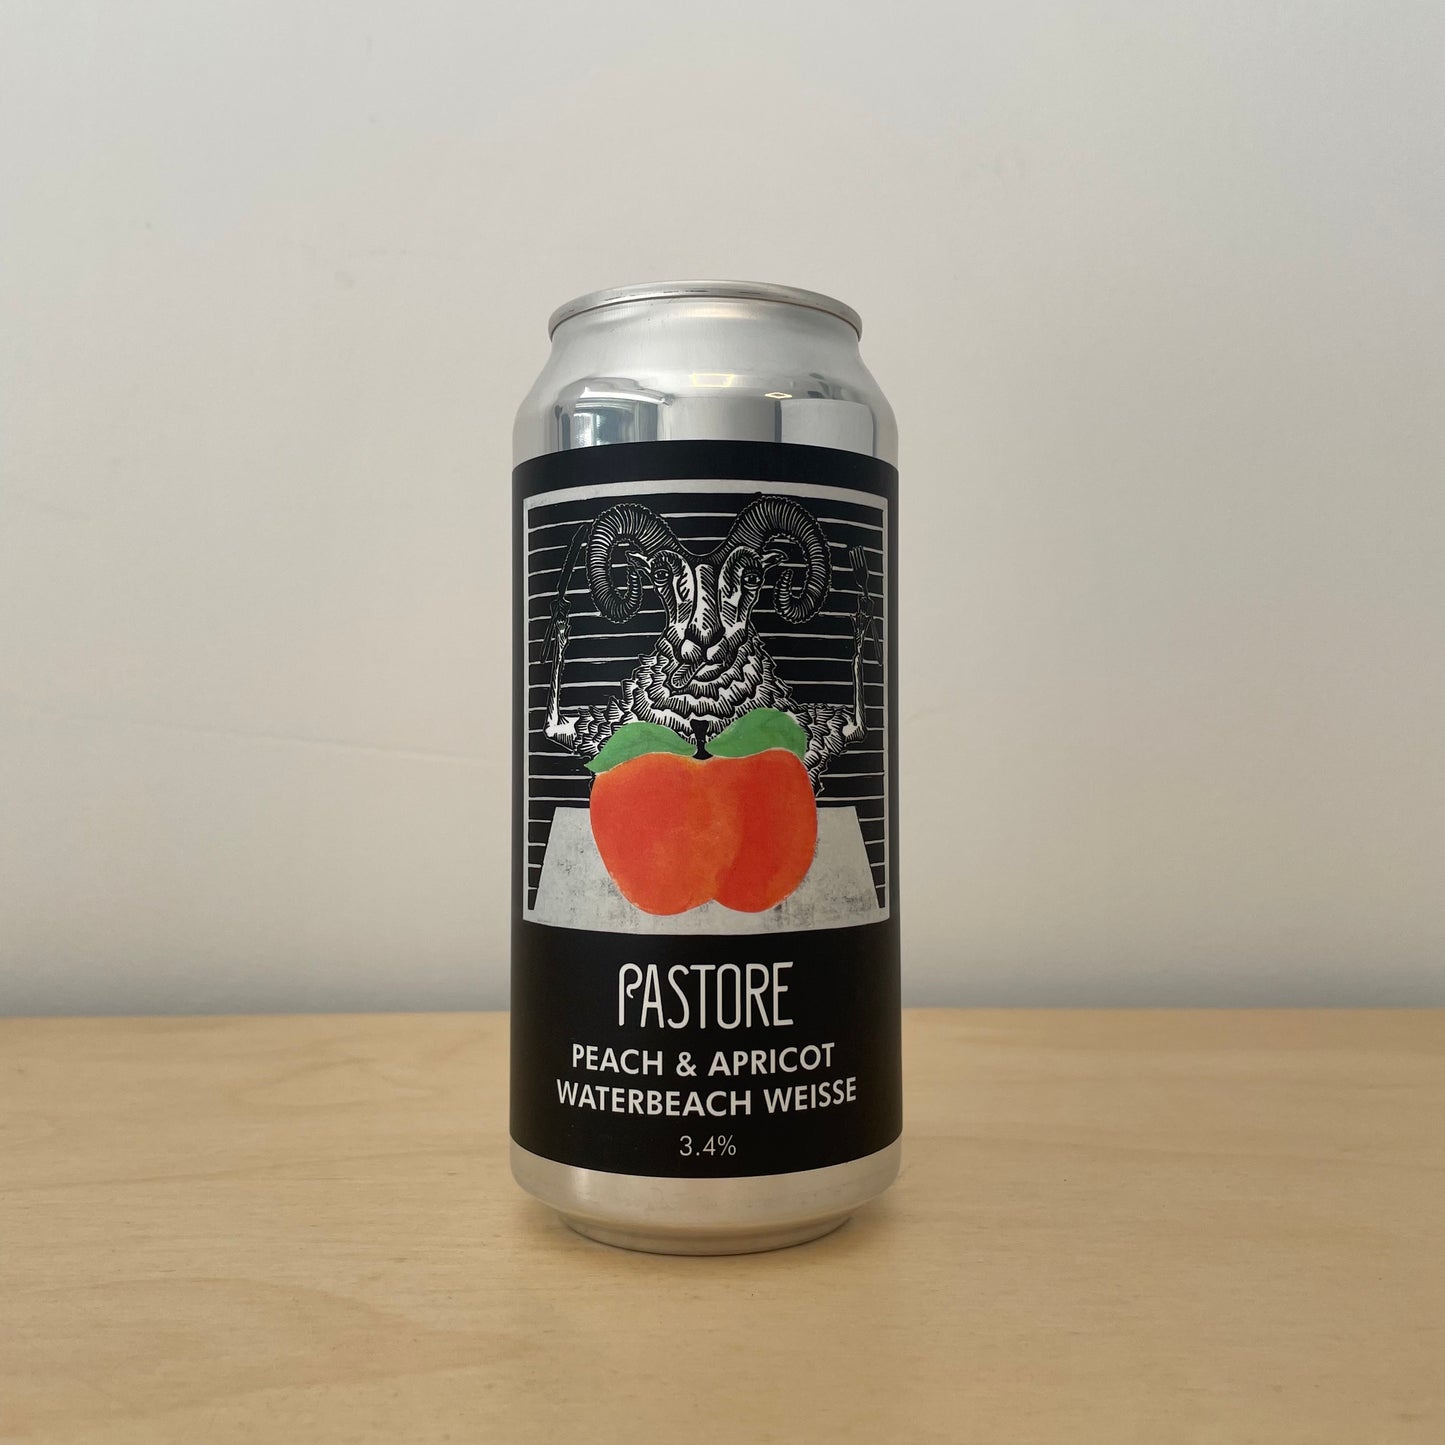 Pastore Peach & Apricot Waterbeach Weisse (440ml Can)